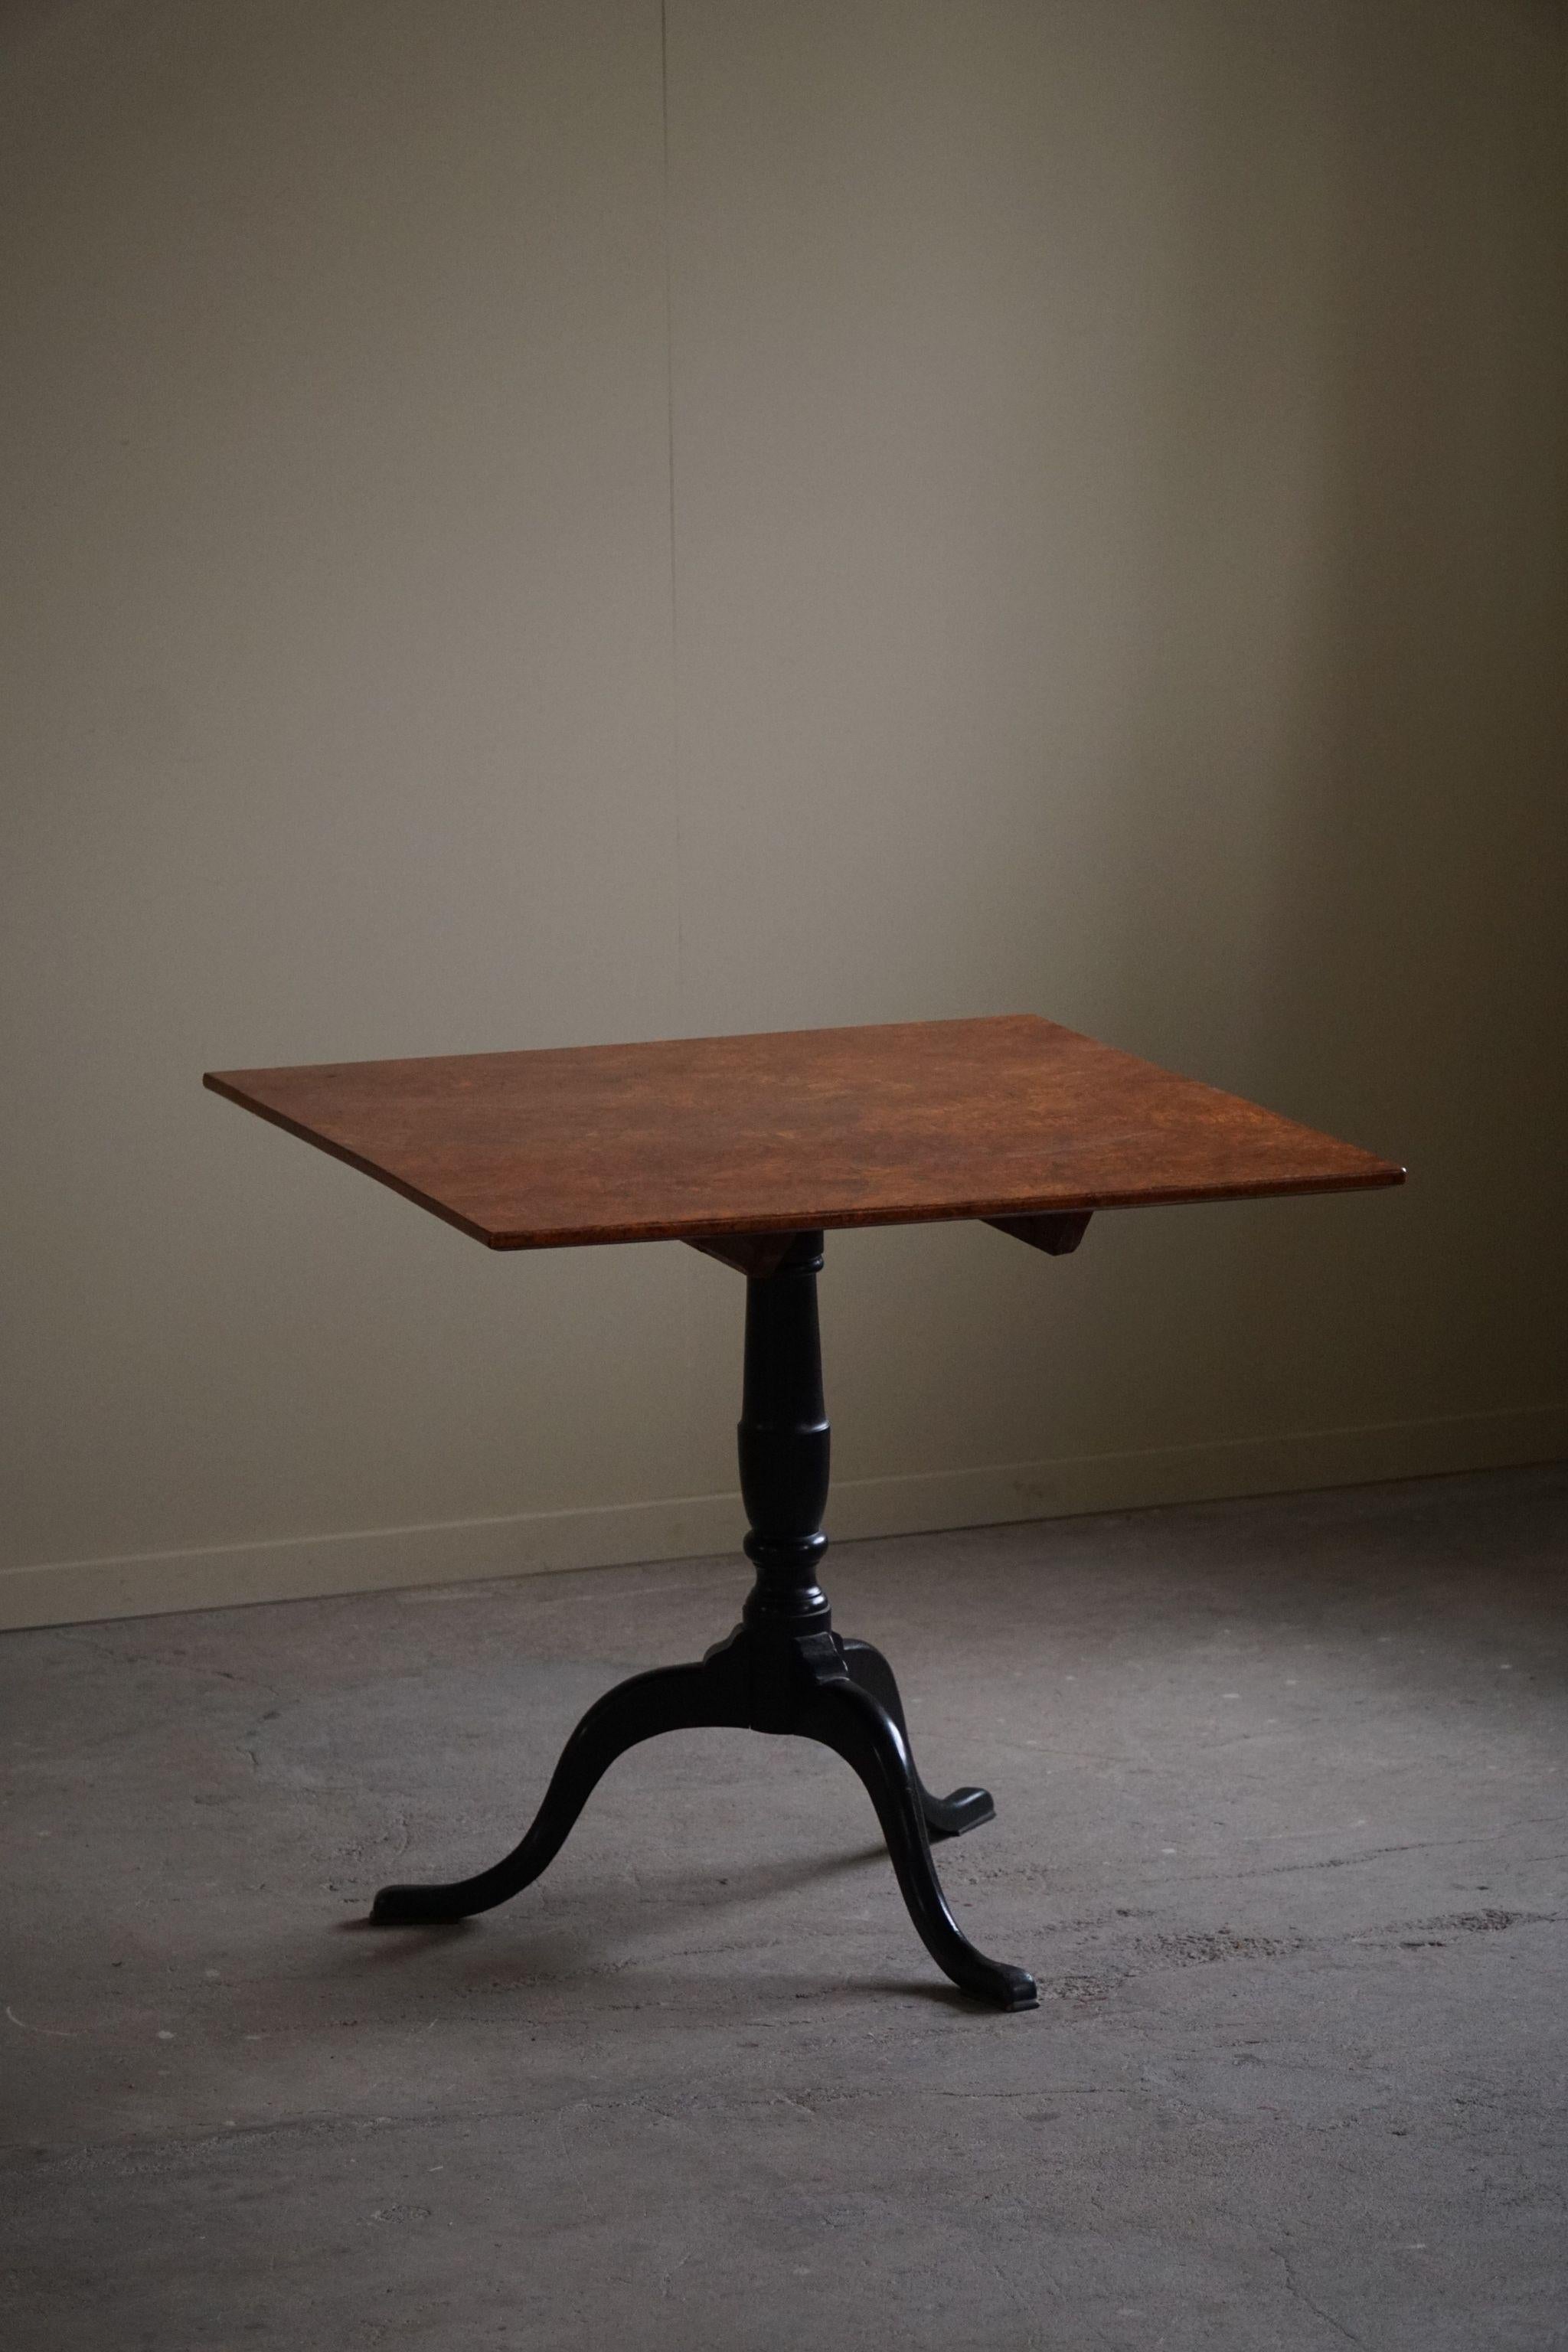 Handcrafted Square Antique Drop Leaf Table in Burl Wood, Swedish, 19th Century For Sale 6